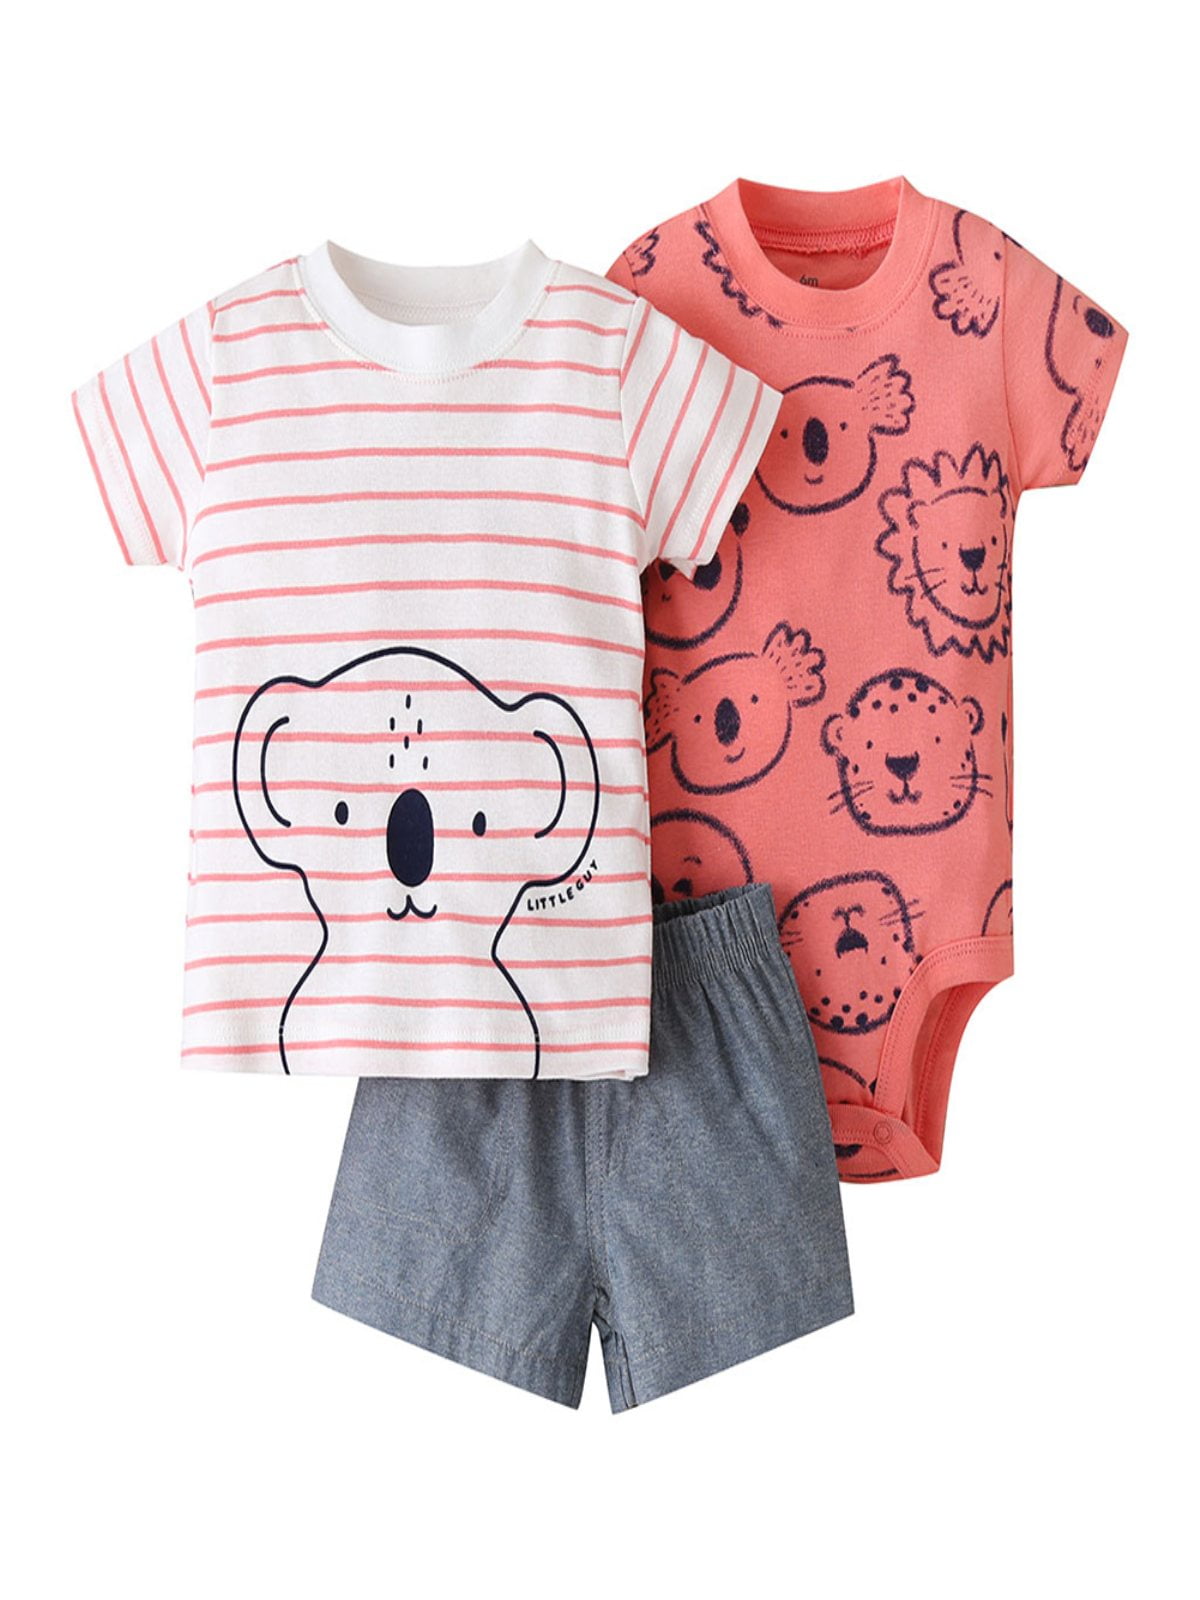 Details about   Toddler Infant Baby Boy Cartoon T-shirt Stripe Shorts Outfits Set Sports Clothes 